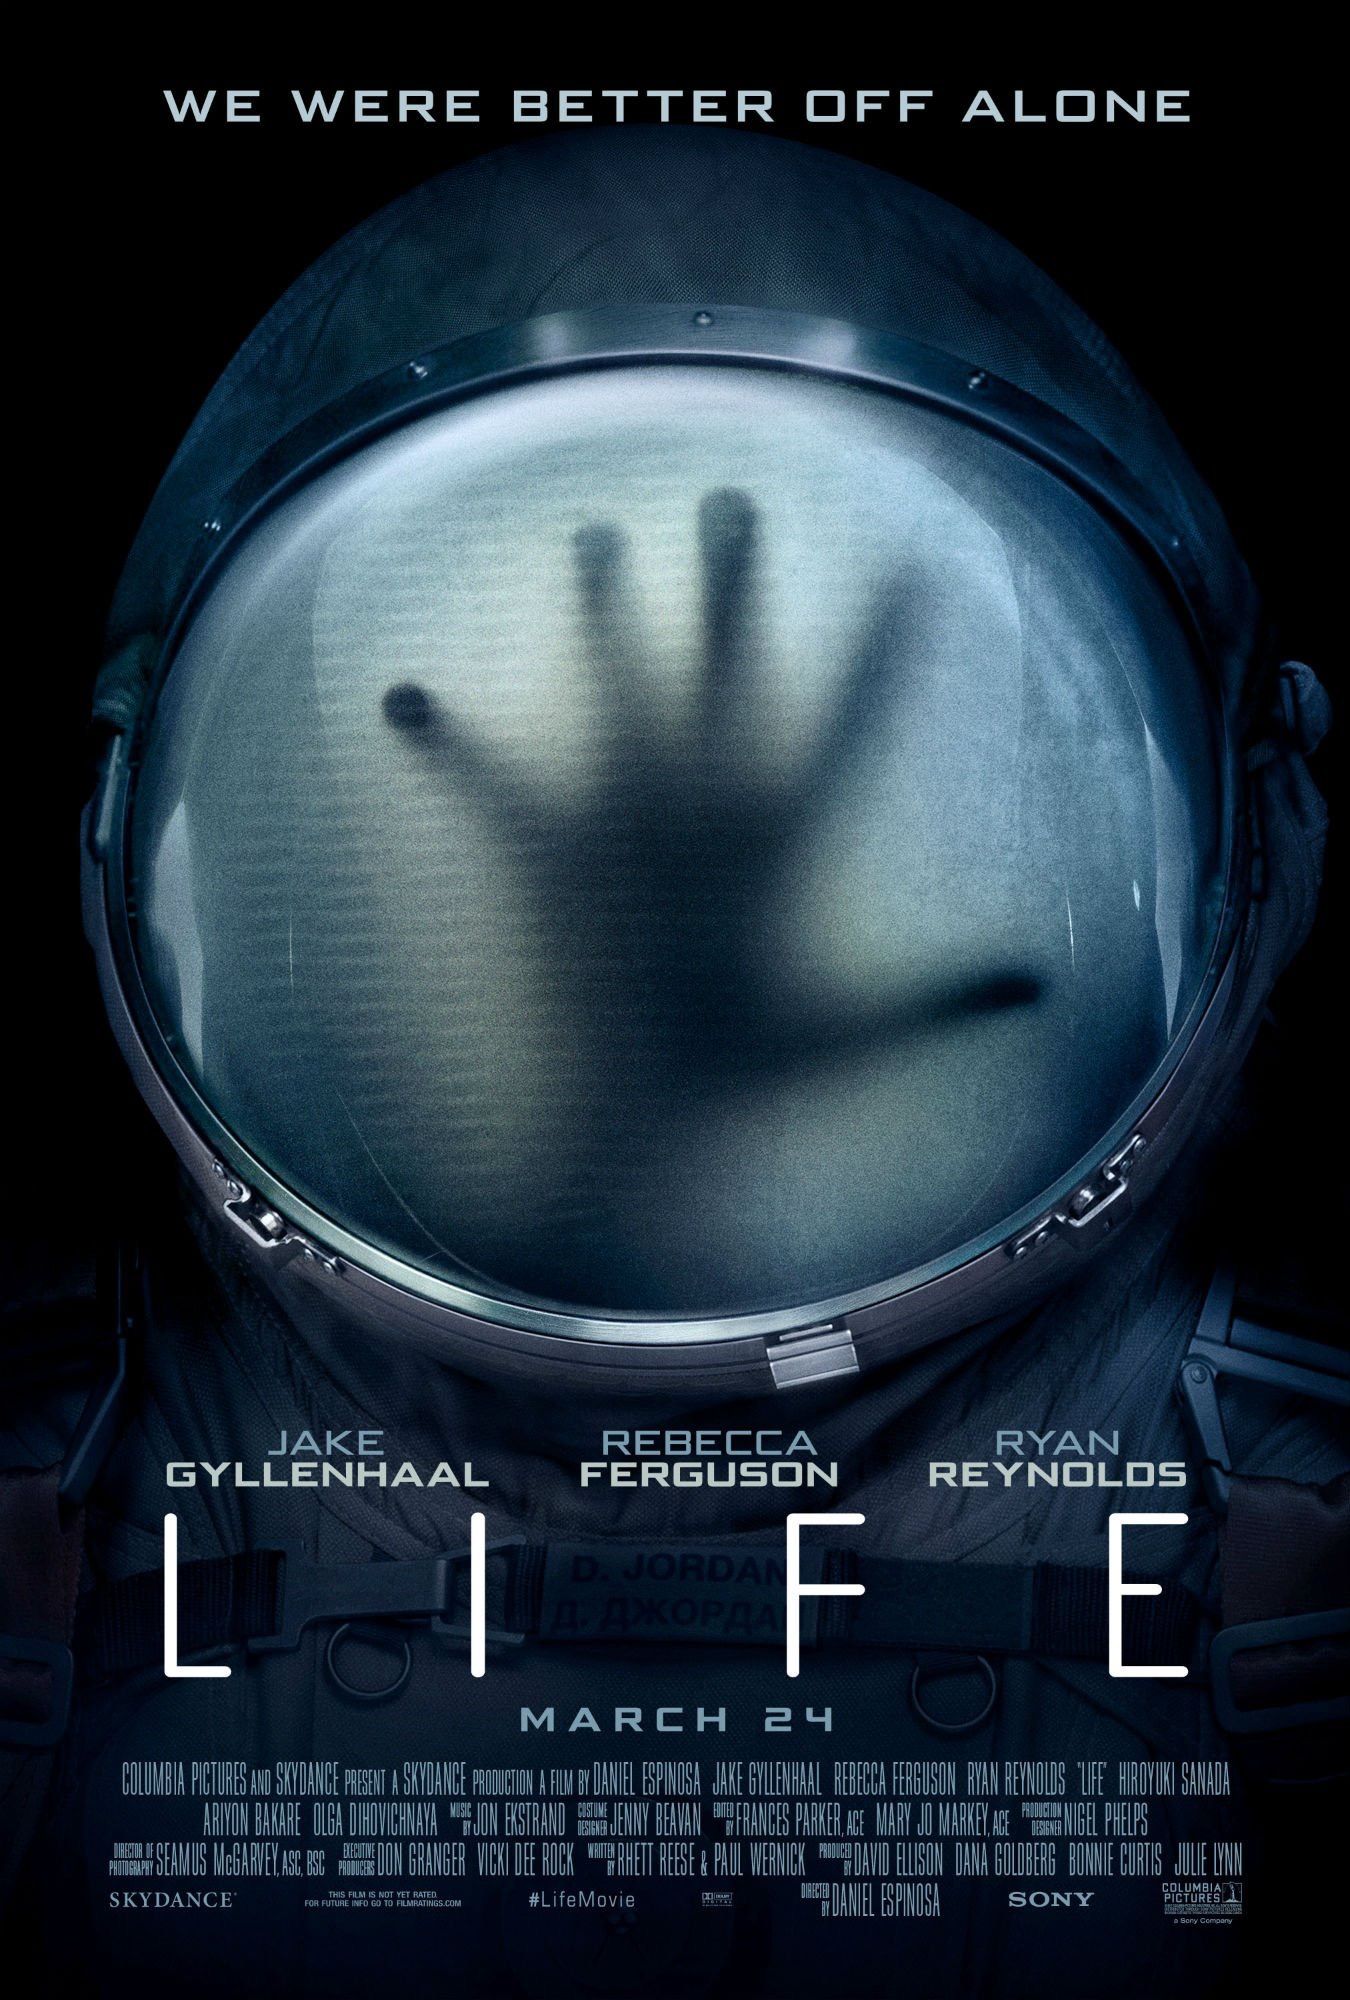 Brand new poster for Life